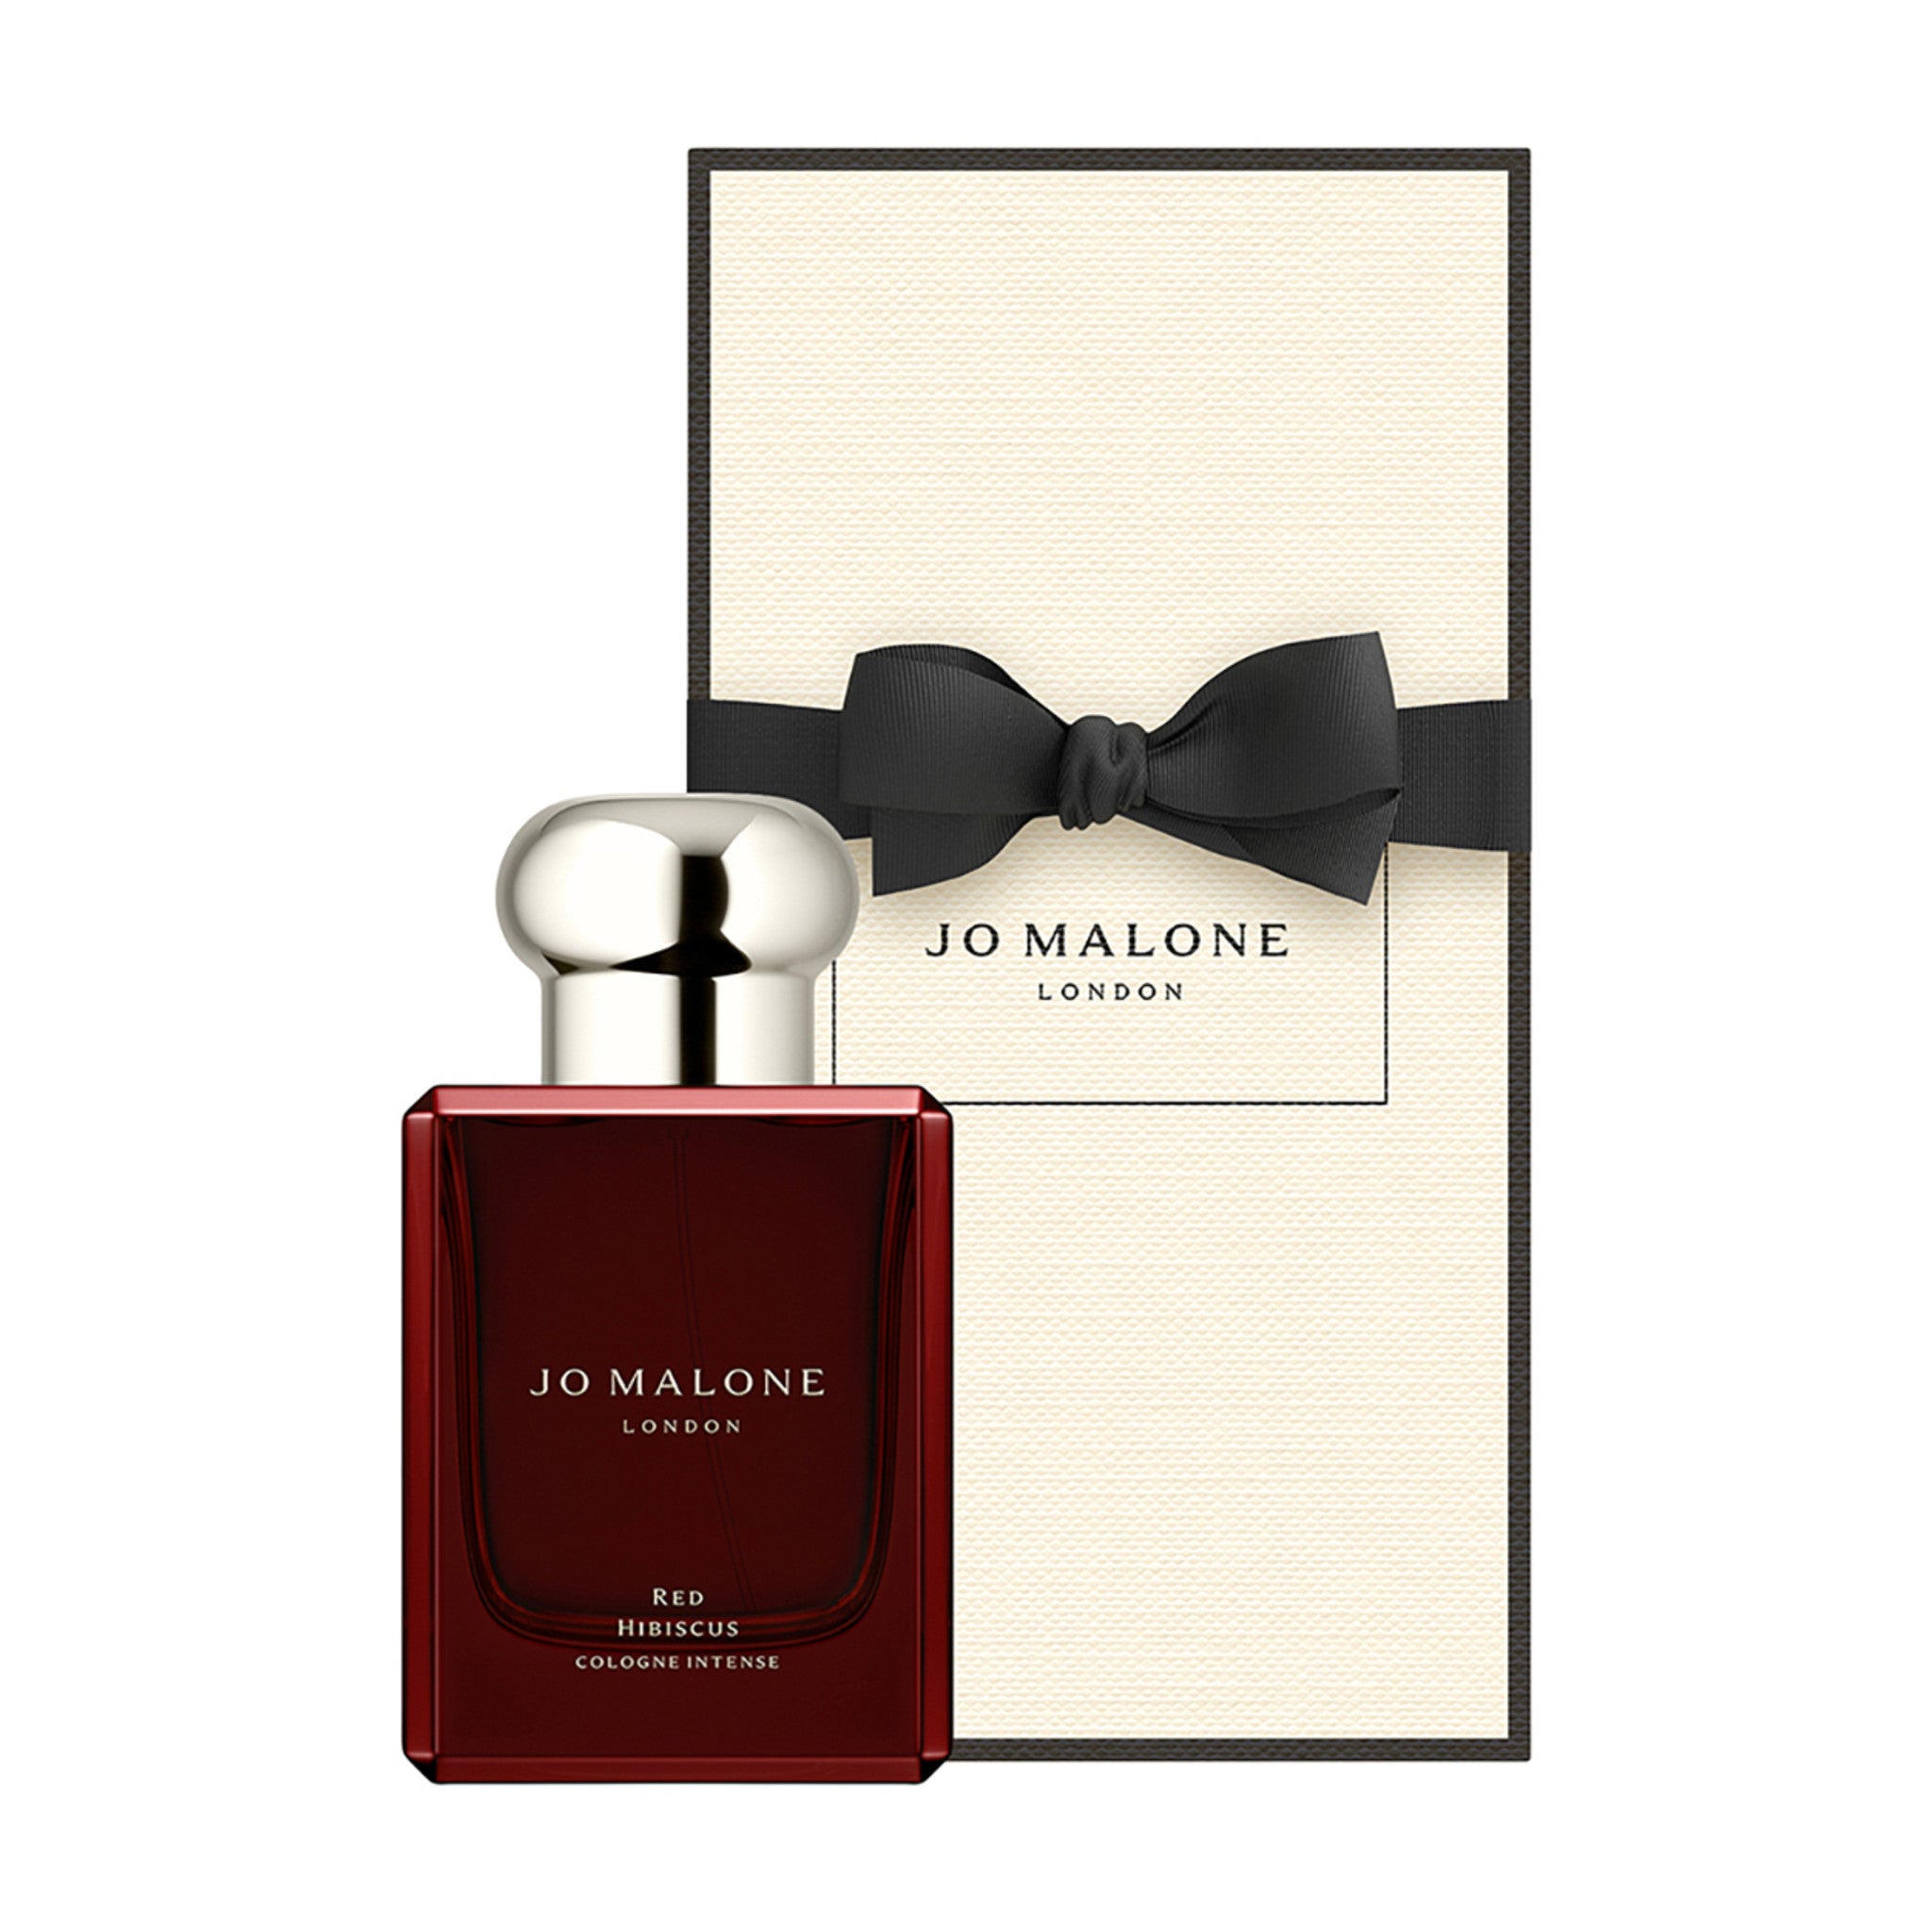 Jo Malone London  Red Hibiscus Cologne Intense Size variant: 1.7 fl oz main image.